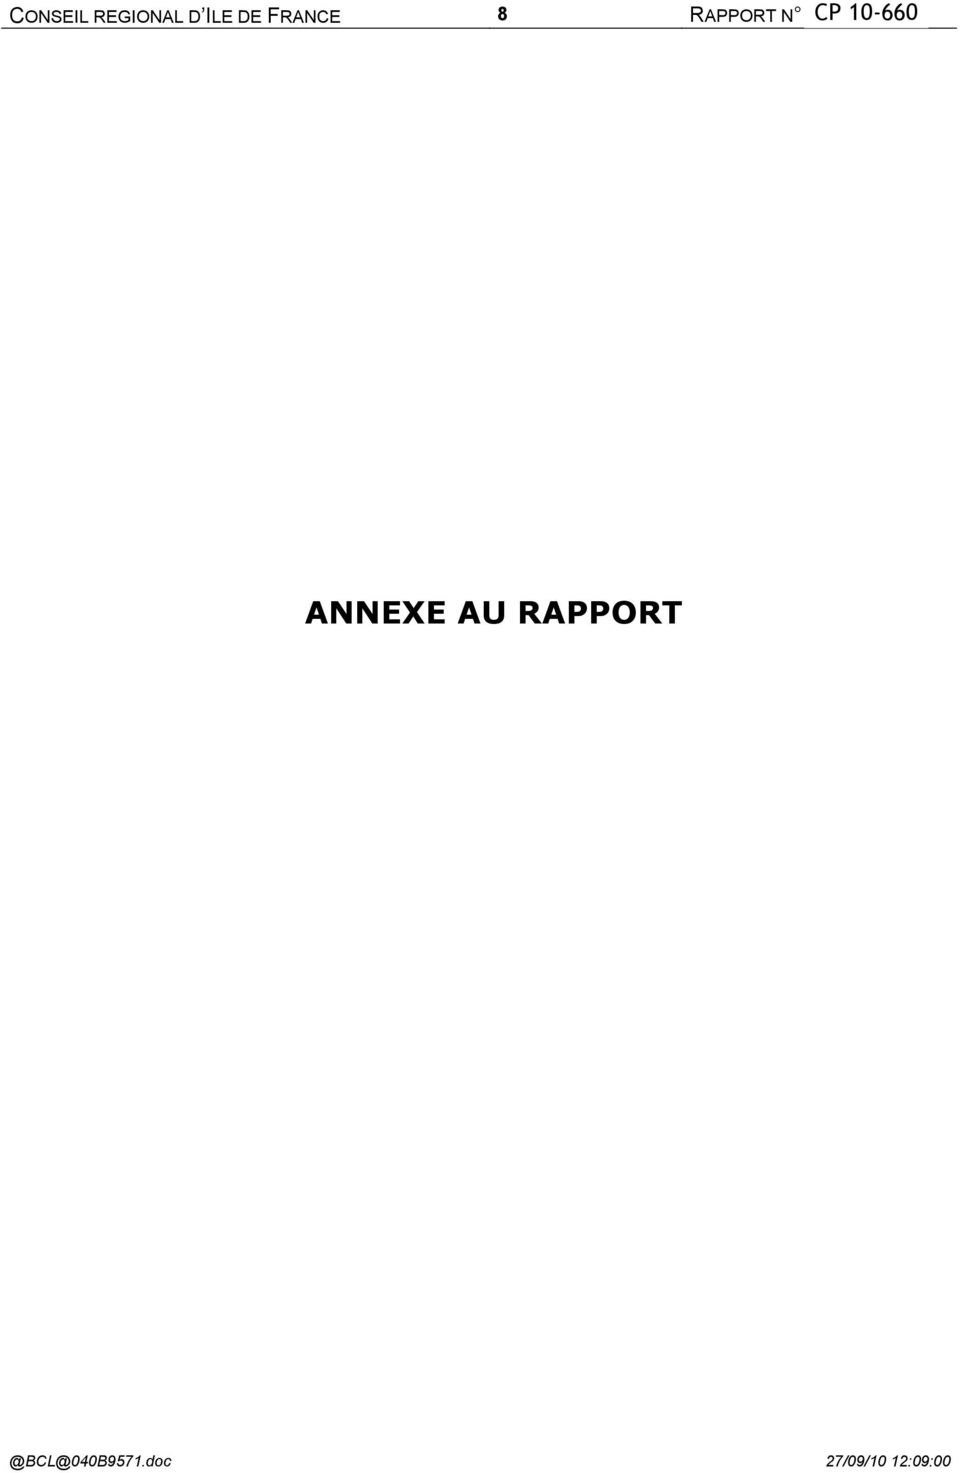 RAPPORT N <%numcx%>